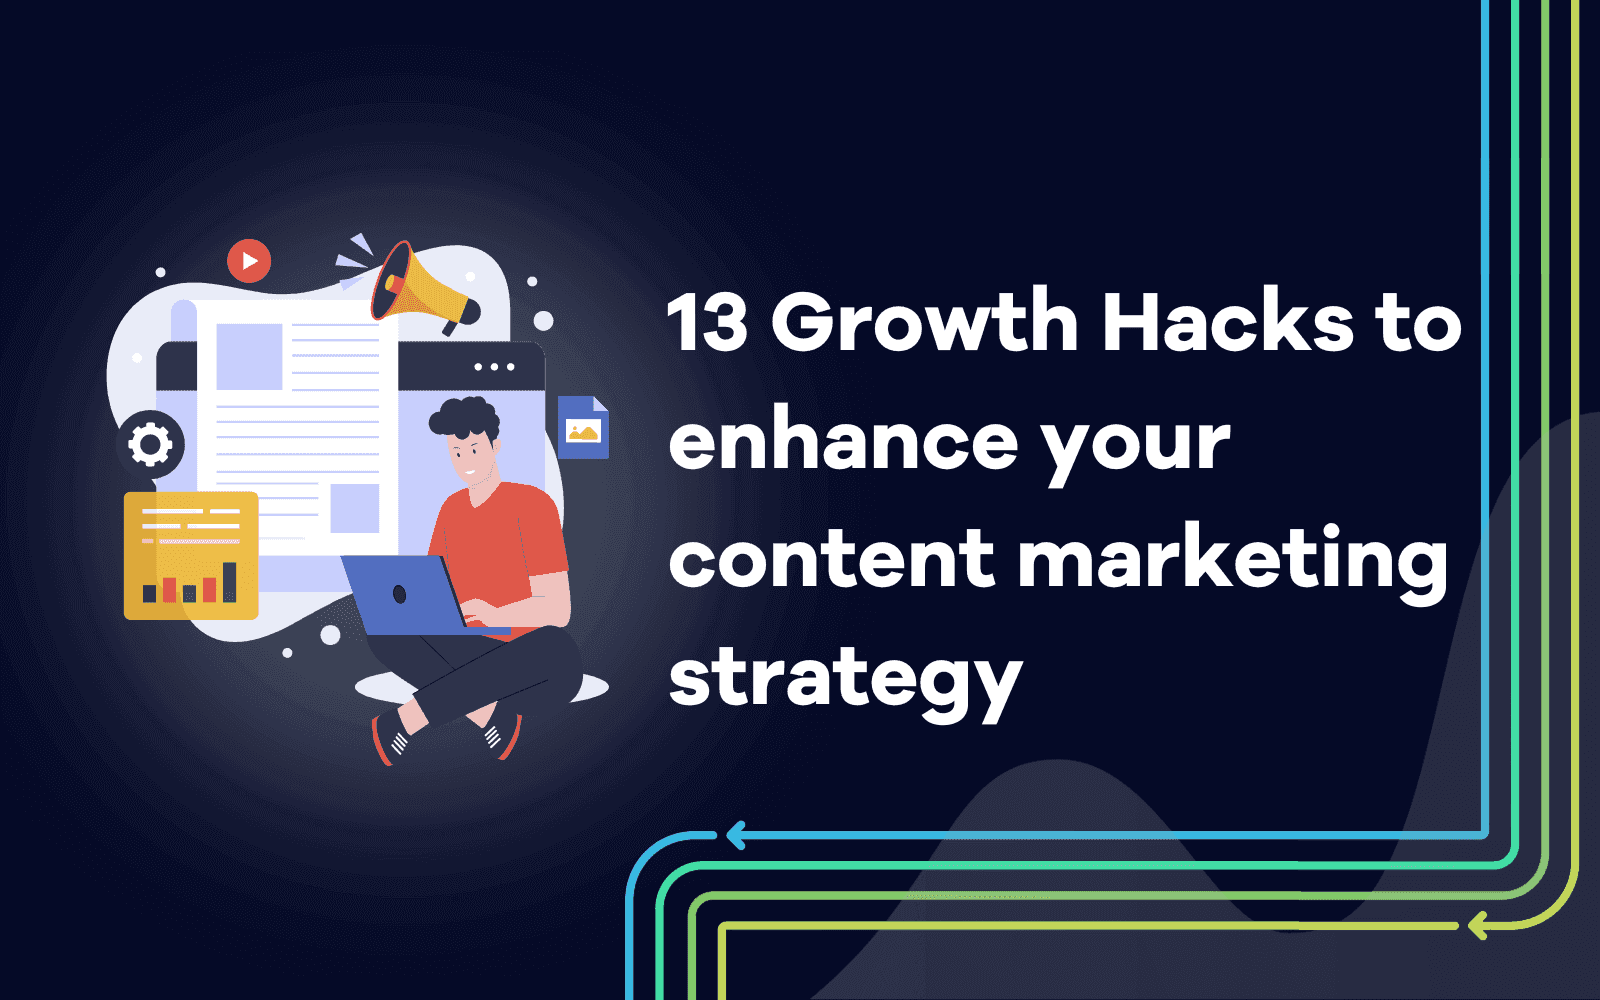 Growth Hacks to enhance your content marketing strategy